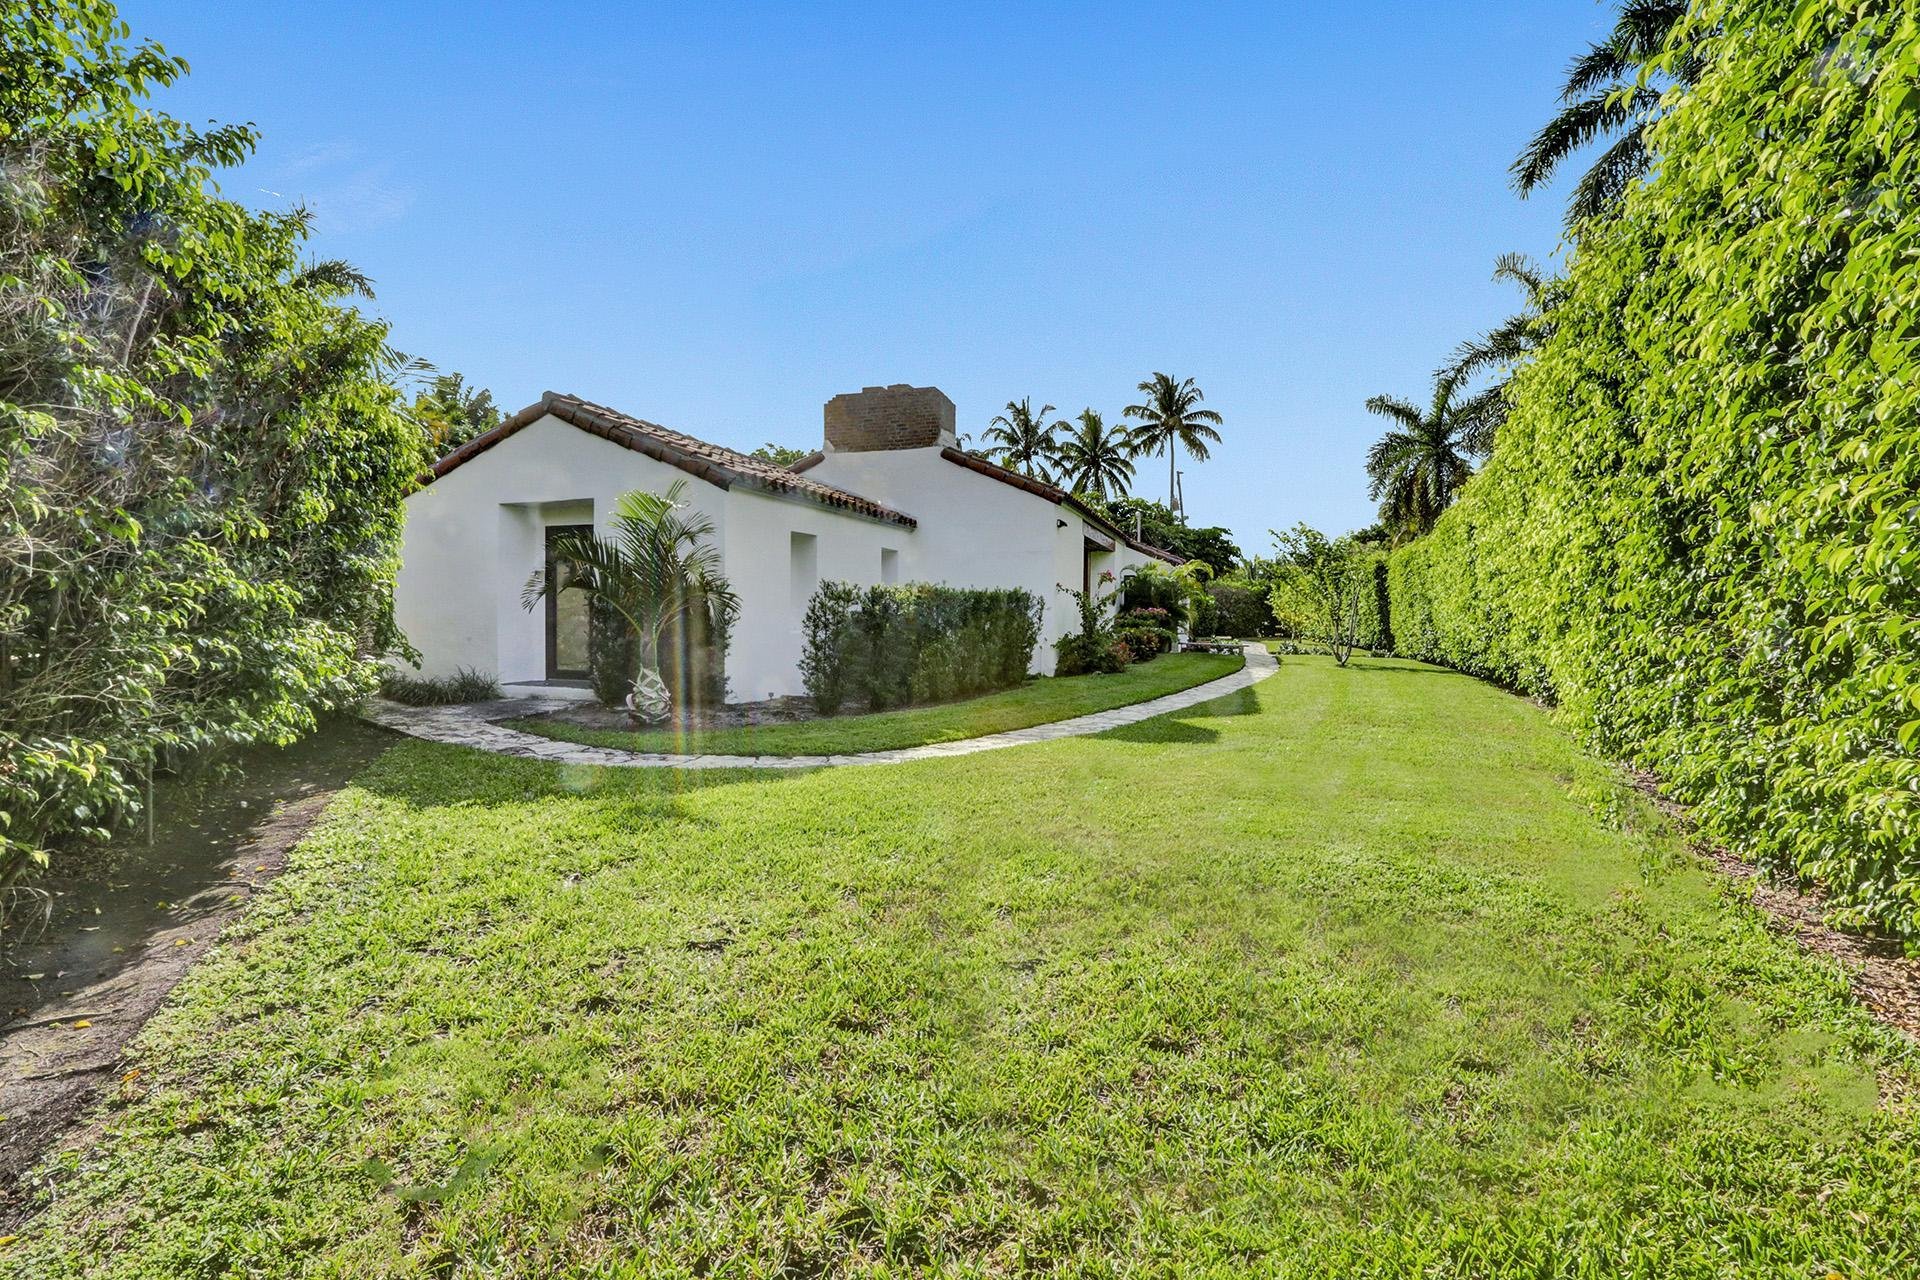 Check Out This Classic Miami Beach Mediterranean On Pine Tree Drive Asking $6.5 Million9.jpg